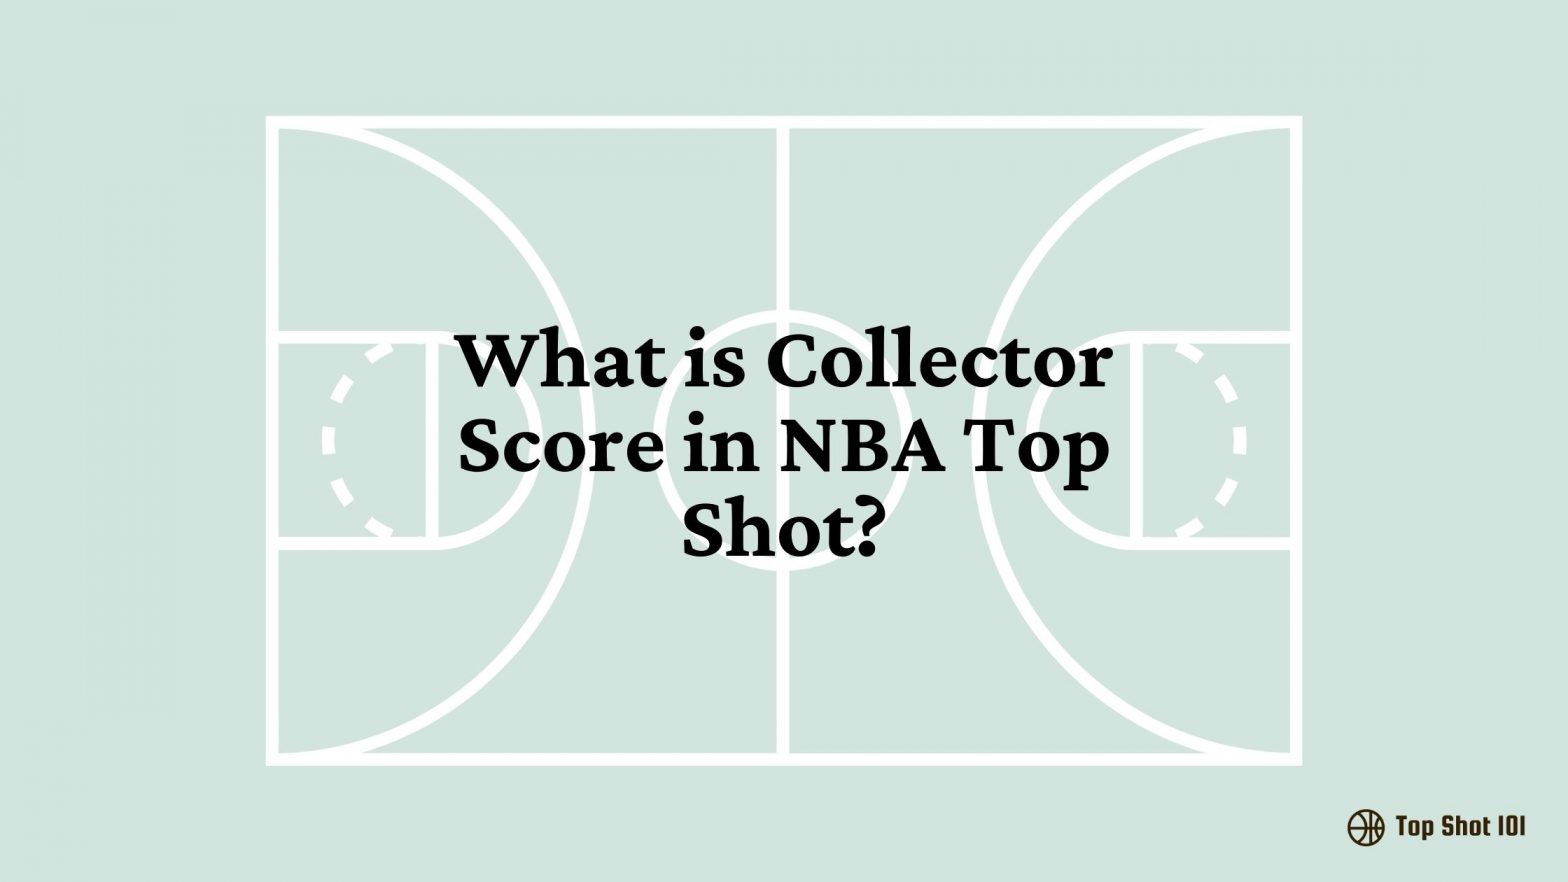 What is Collector Score in NBA Top Shot?